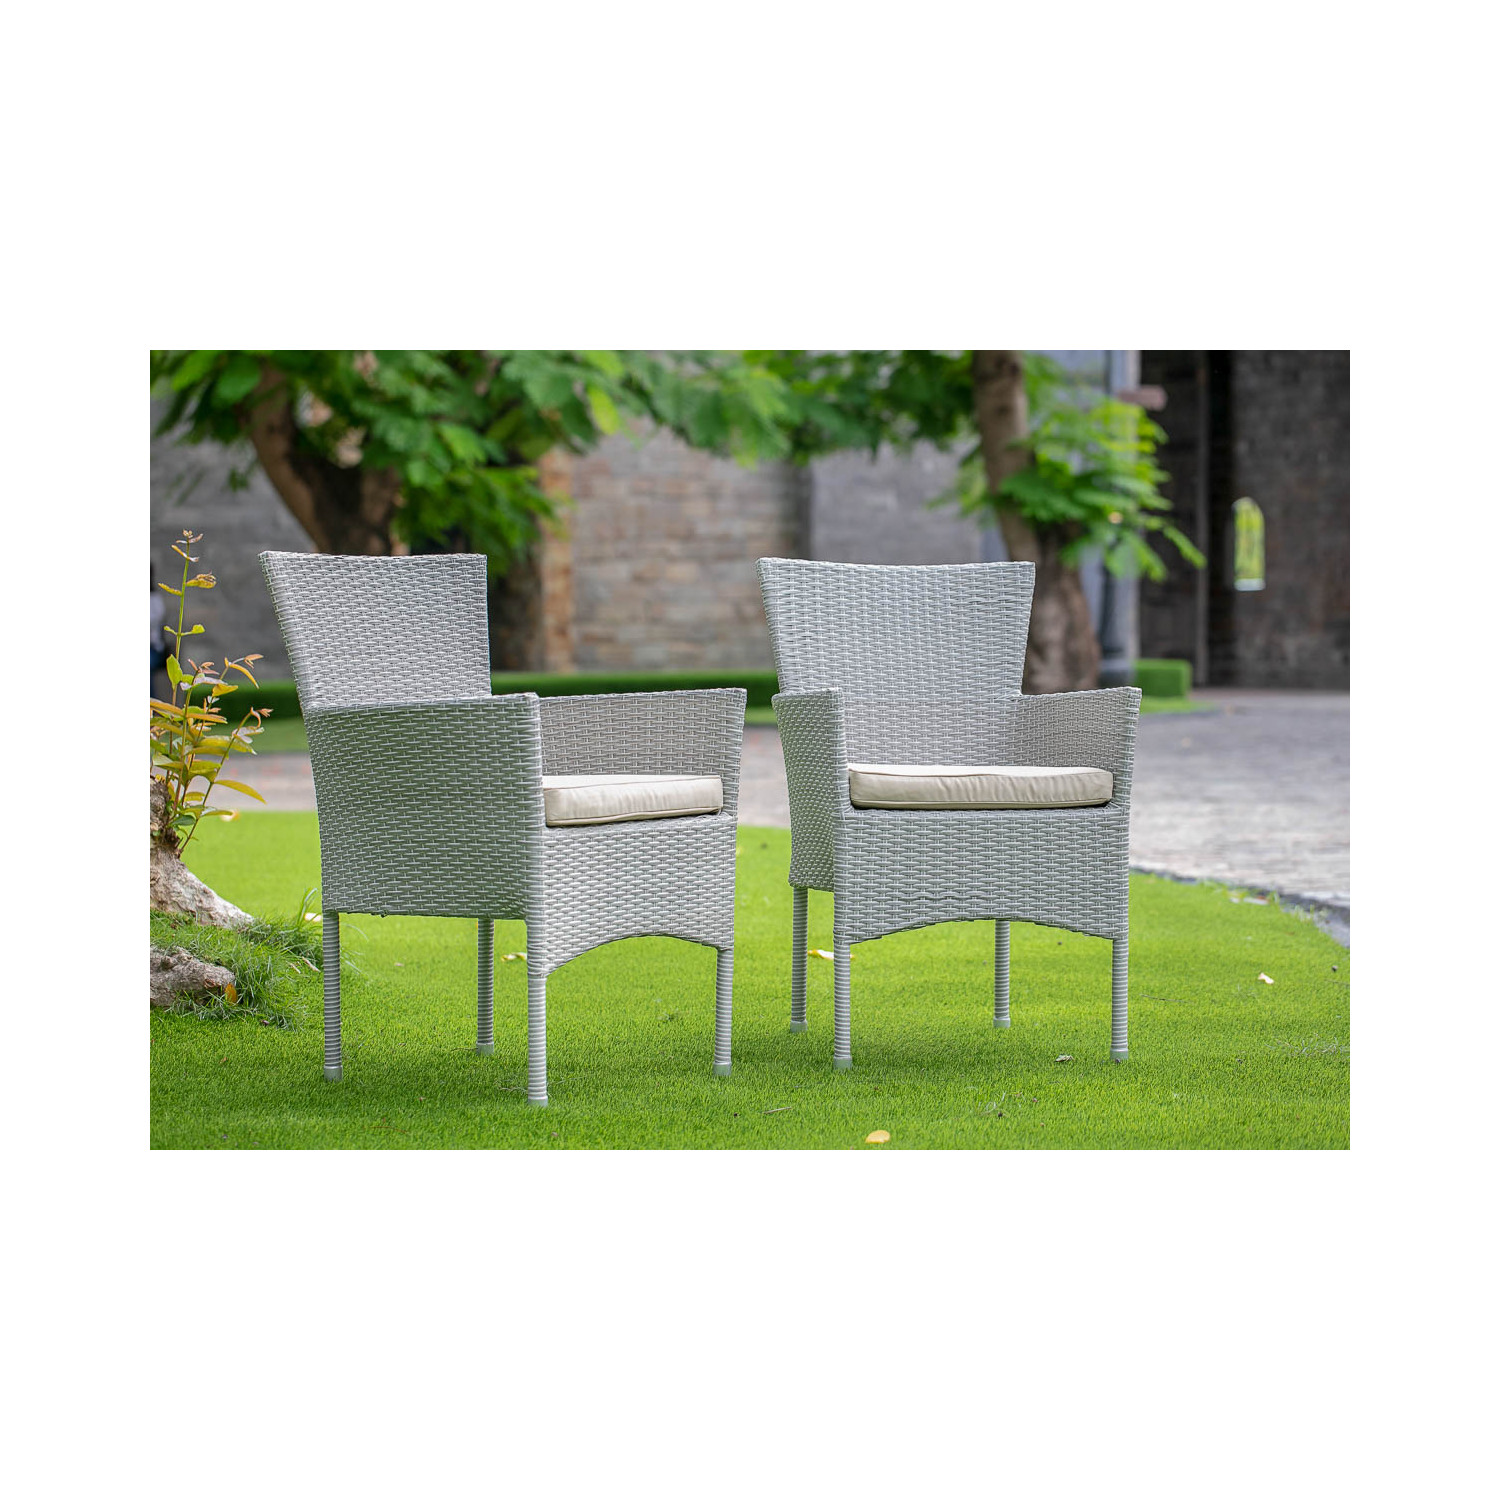 East West Furniture Bork Metal & Wicker Patio Dining Chair in Natural (Set of 2) - image 1 of 3